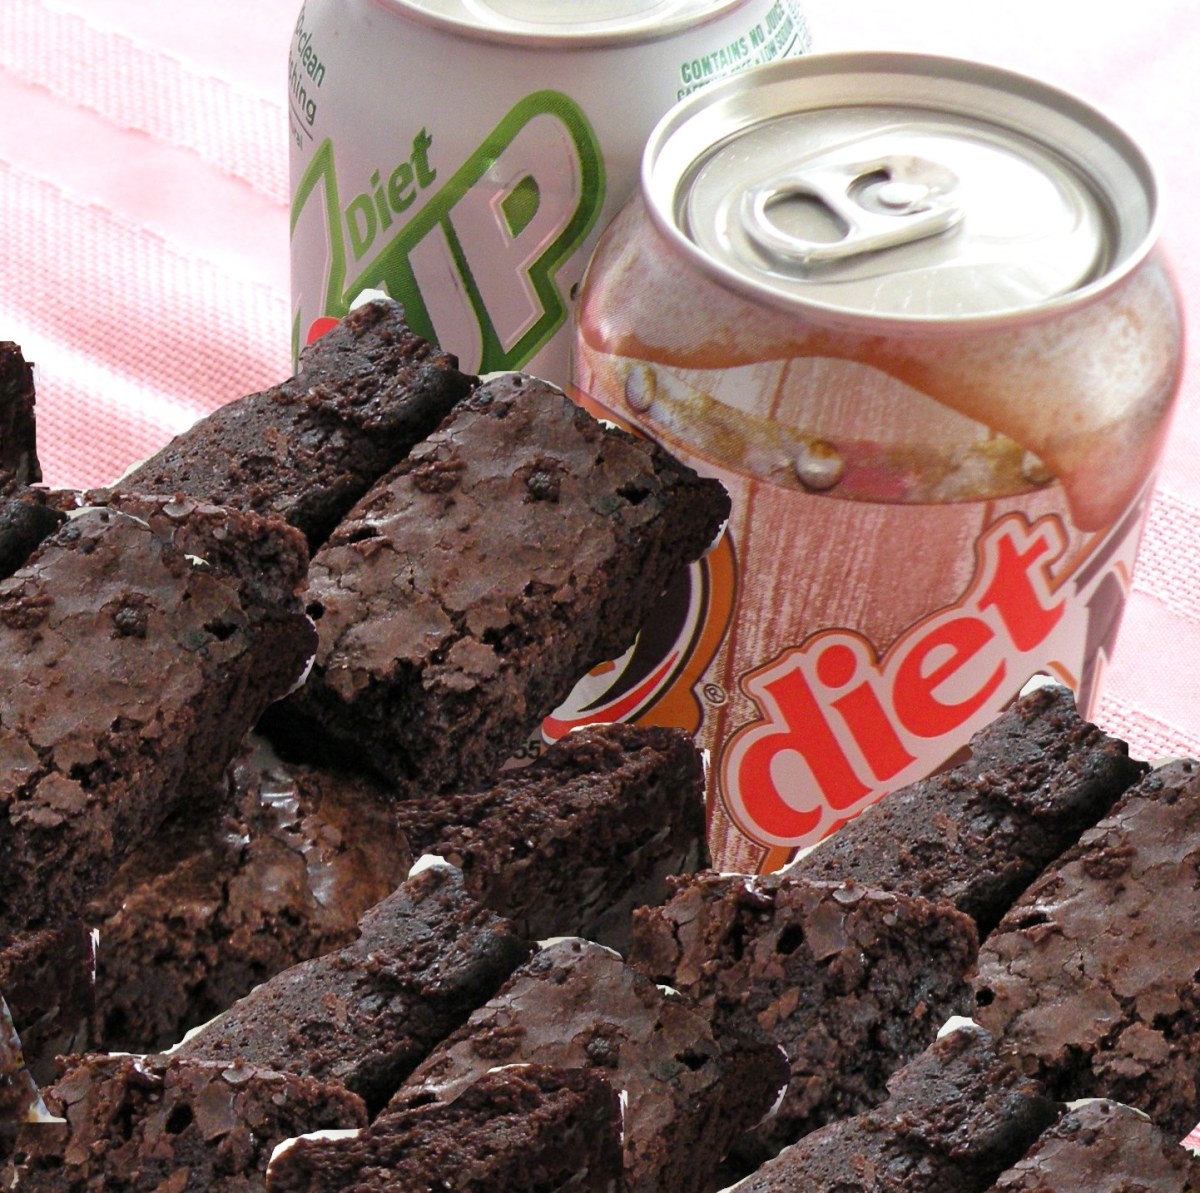 Diet soda can make you crave high calorie sweets.